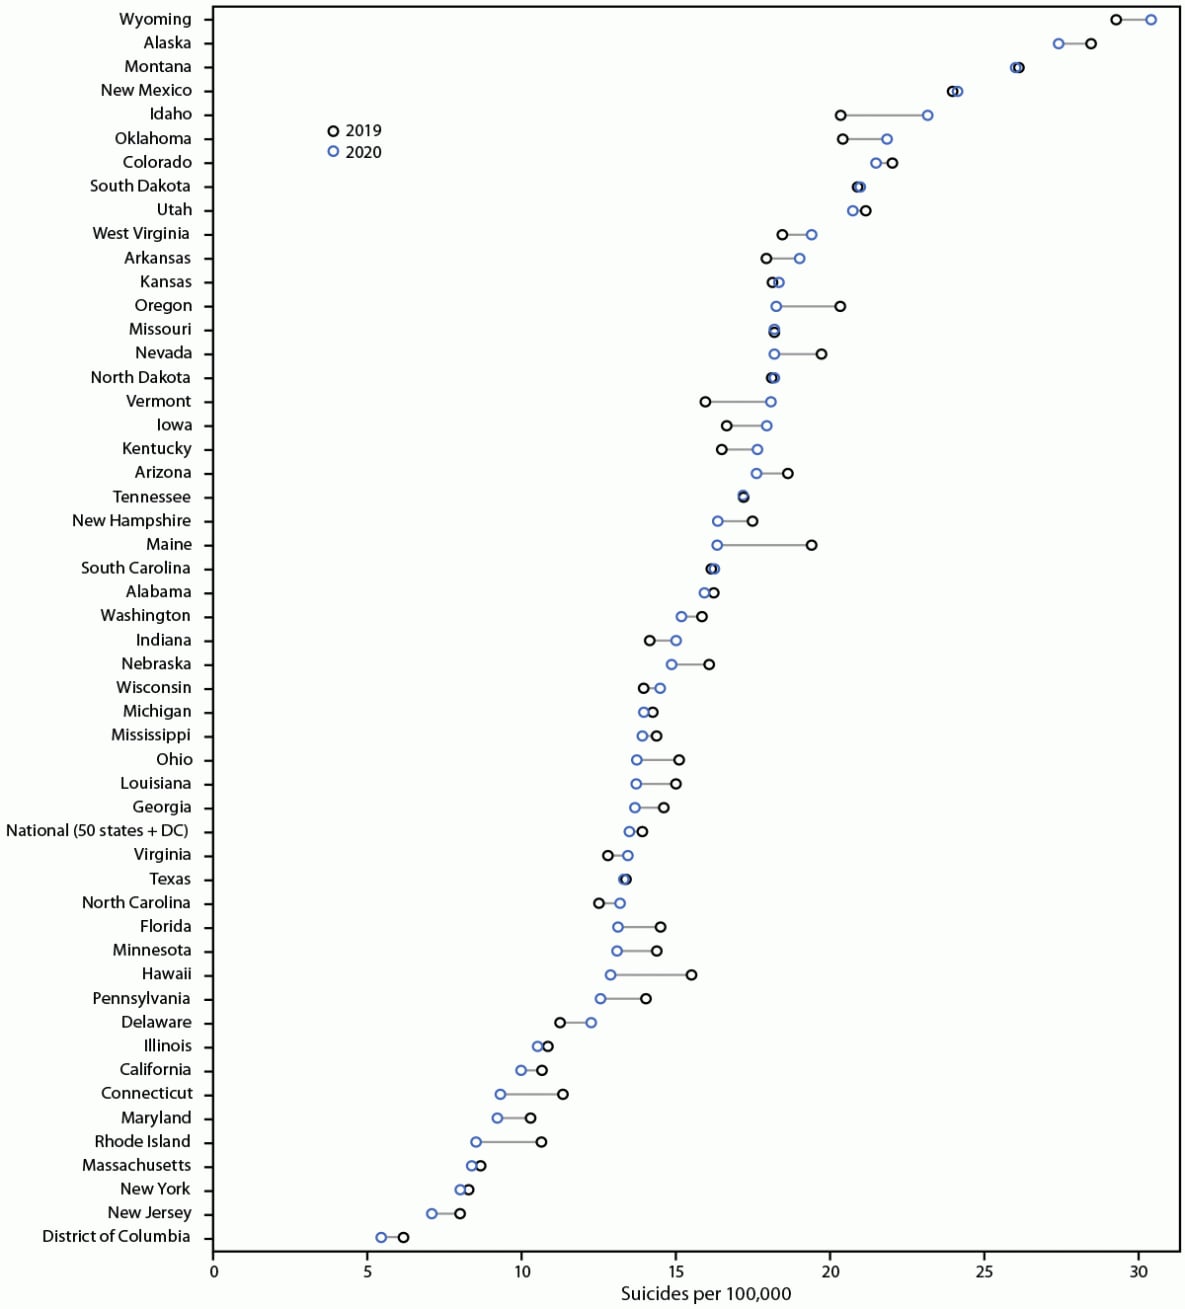 Figure depicts overall age-adjusted rate of suicide by state in the United States during 2019 and 2020 with data from the National Vital Statistics System.